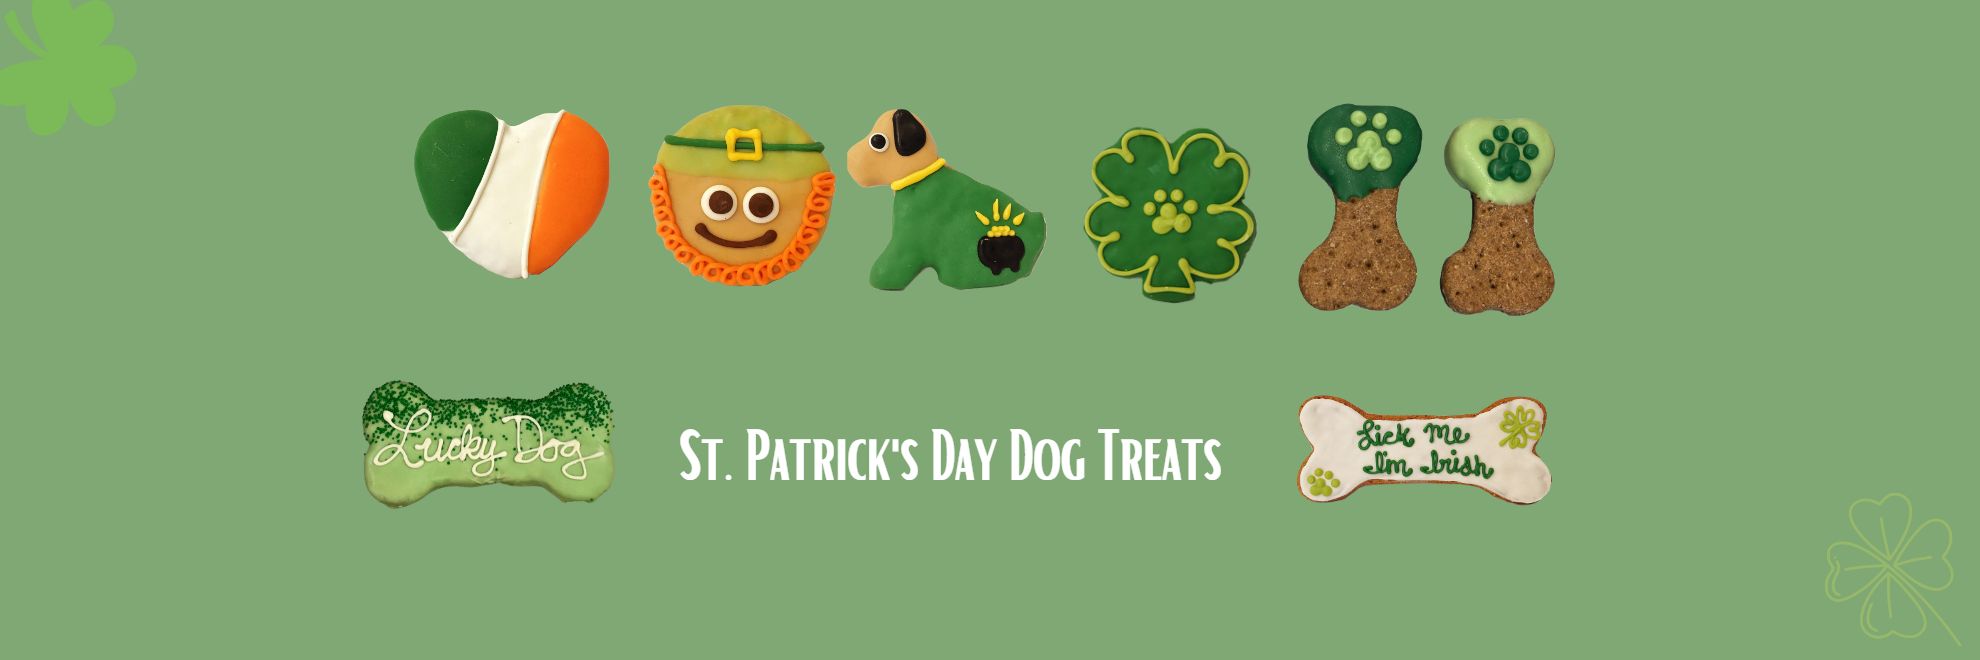 St. Patrick's Day Dog Cookies